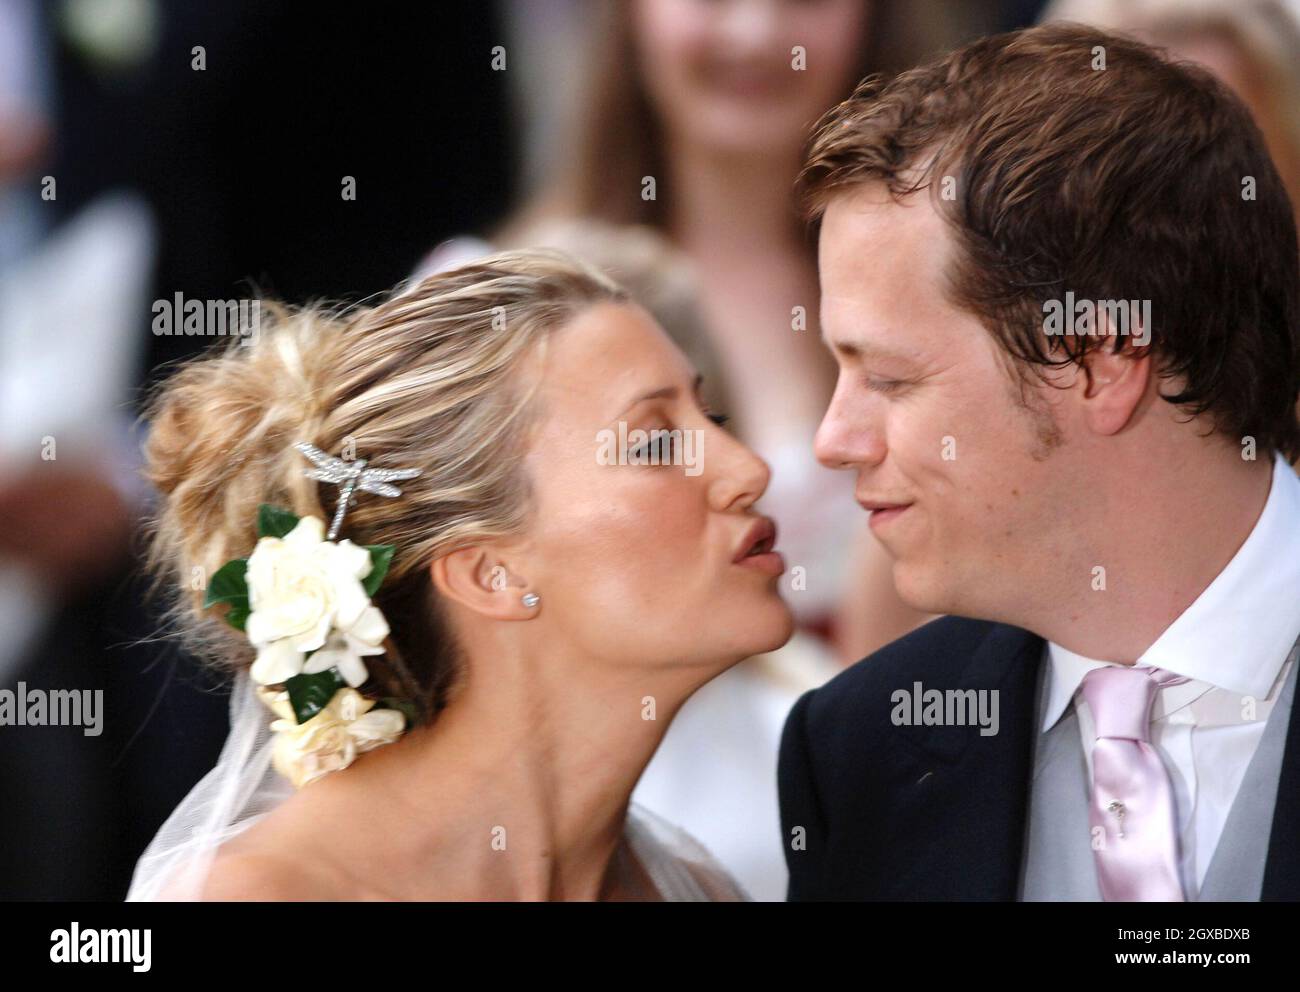 Tom Parker-Bowles and his new wife Sara kiss as they leave St. Nicholas's Church after their wedding ceremony in Henley-on-Thames, England.  Anwar Hussein/allactiondigital.com  Stock Photo